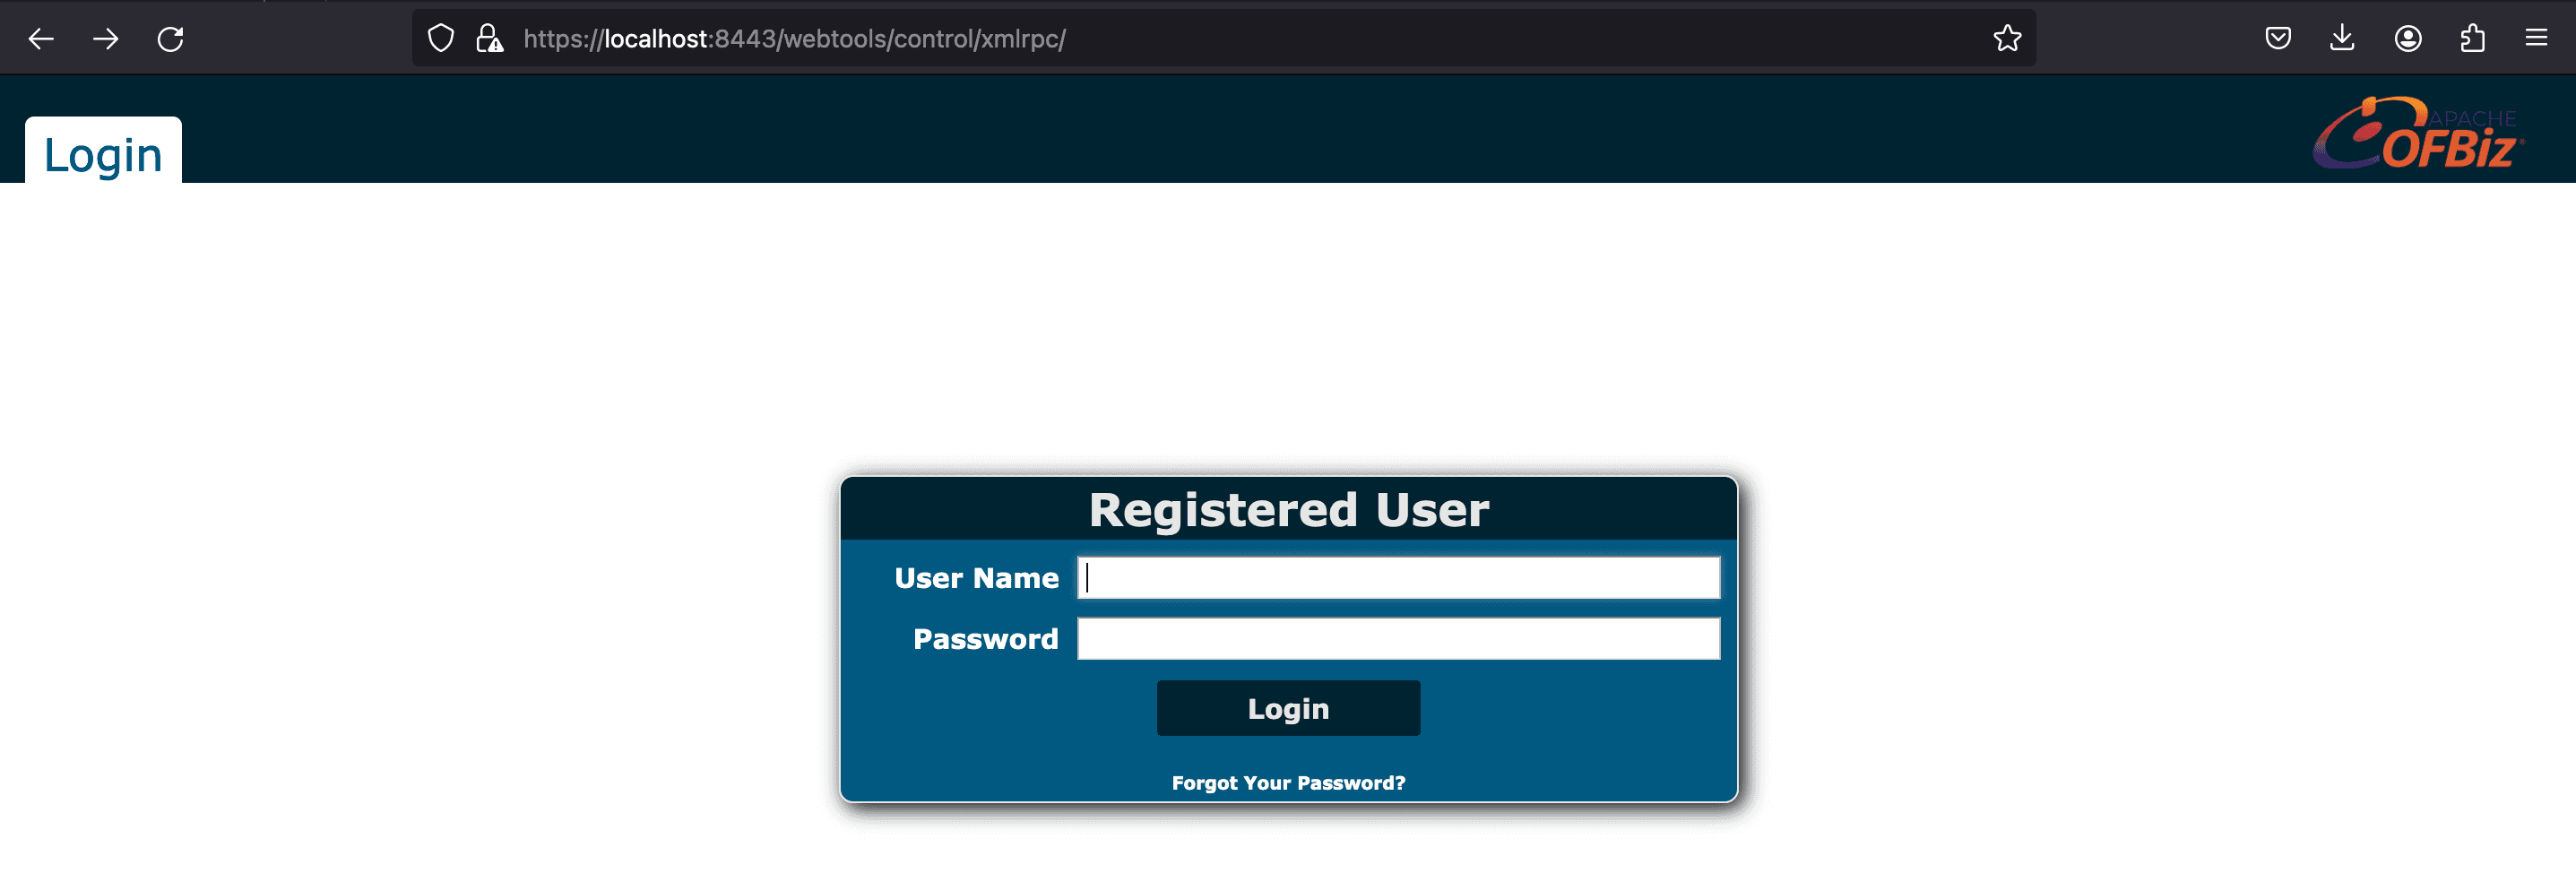 This is the Apache OFBiz Login Page